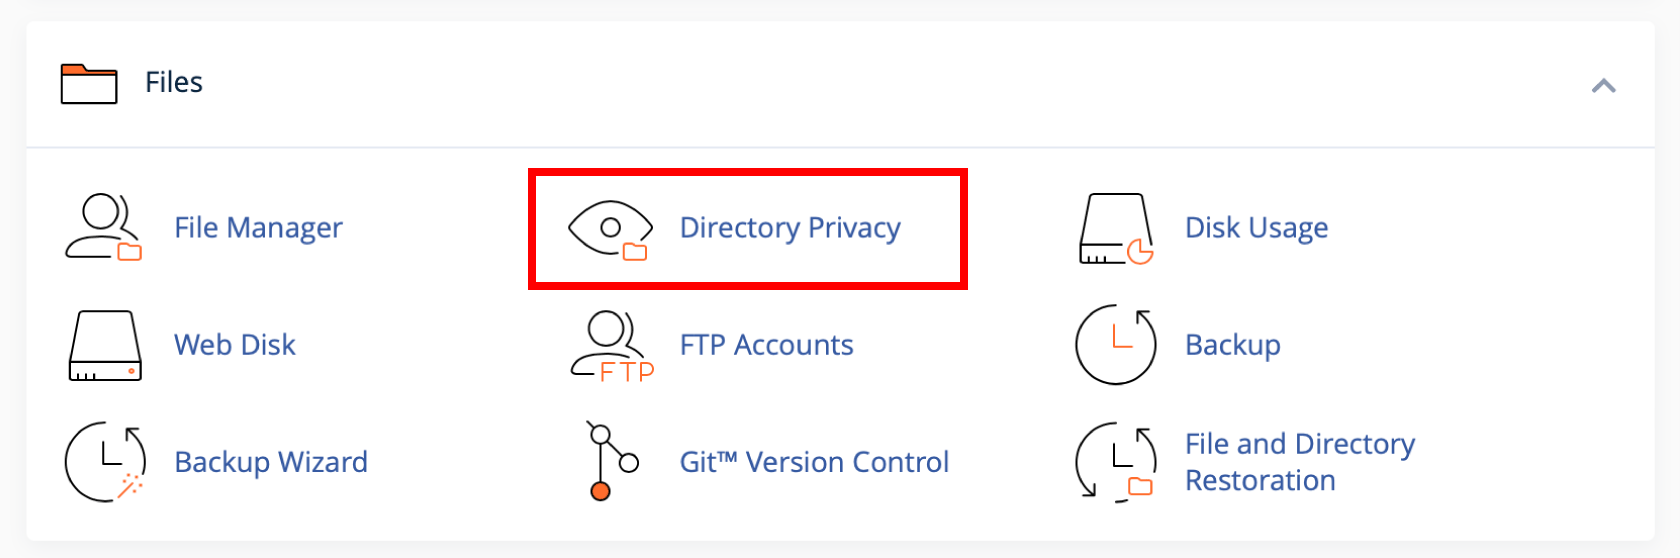 Directory Privacy button in cPanel